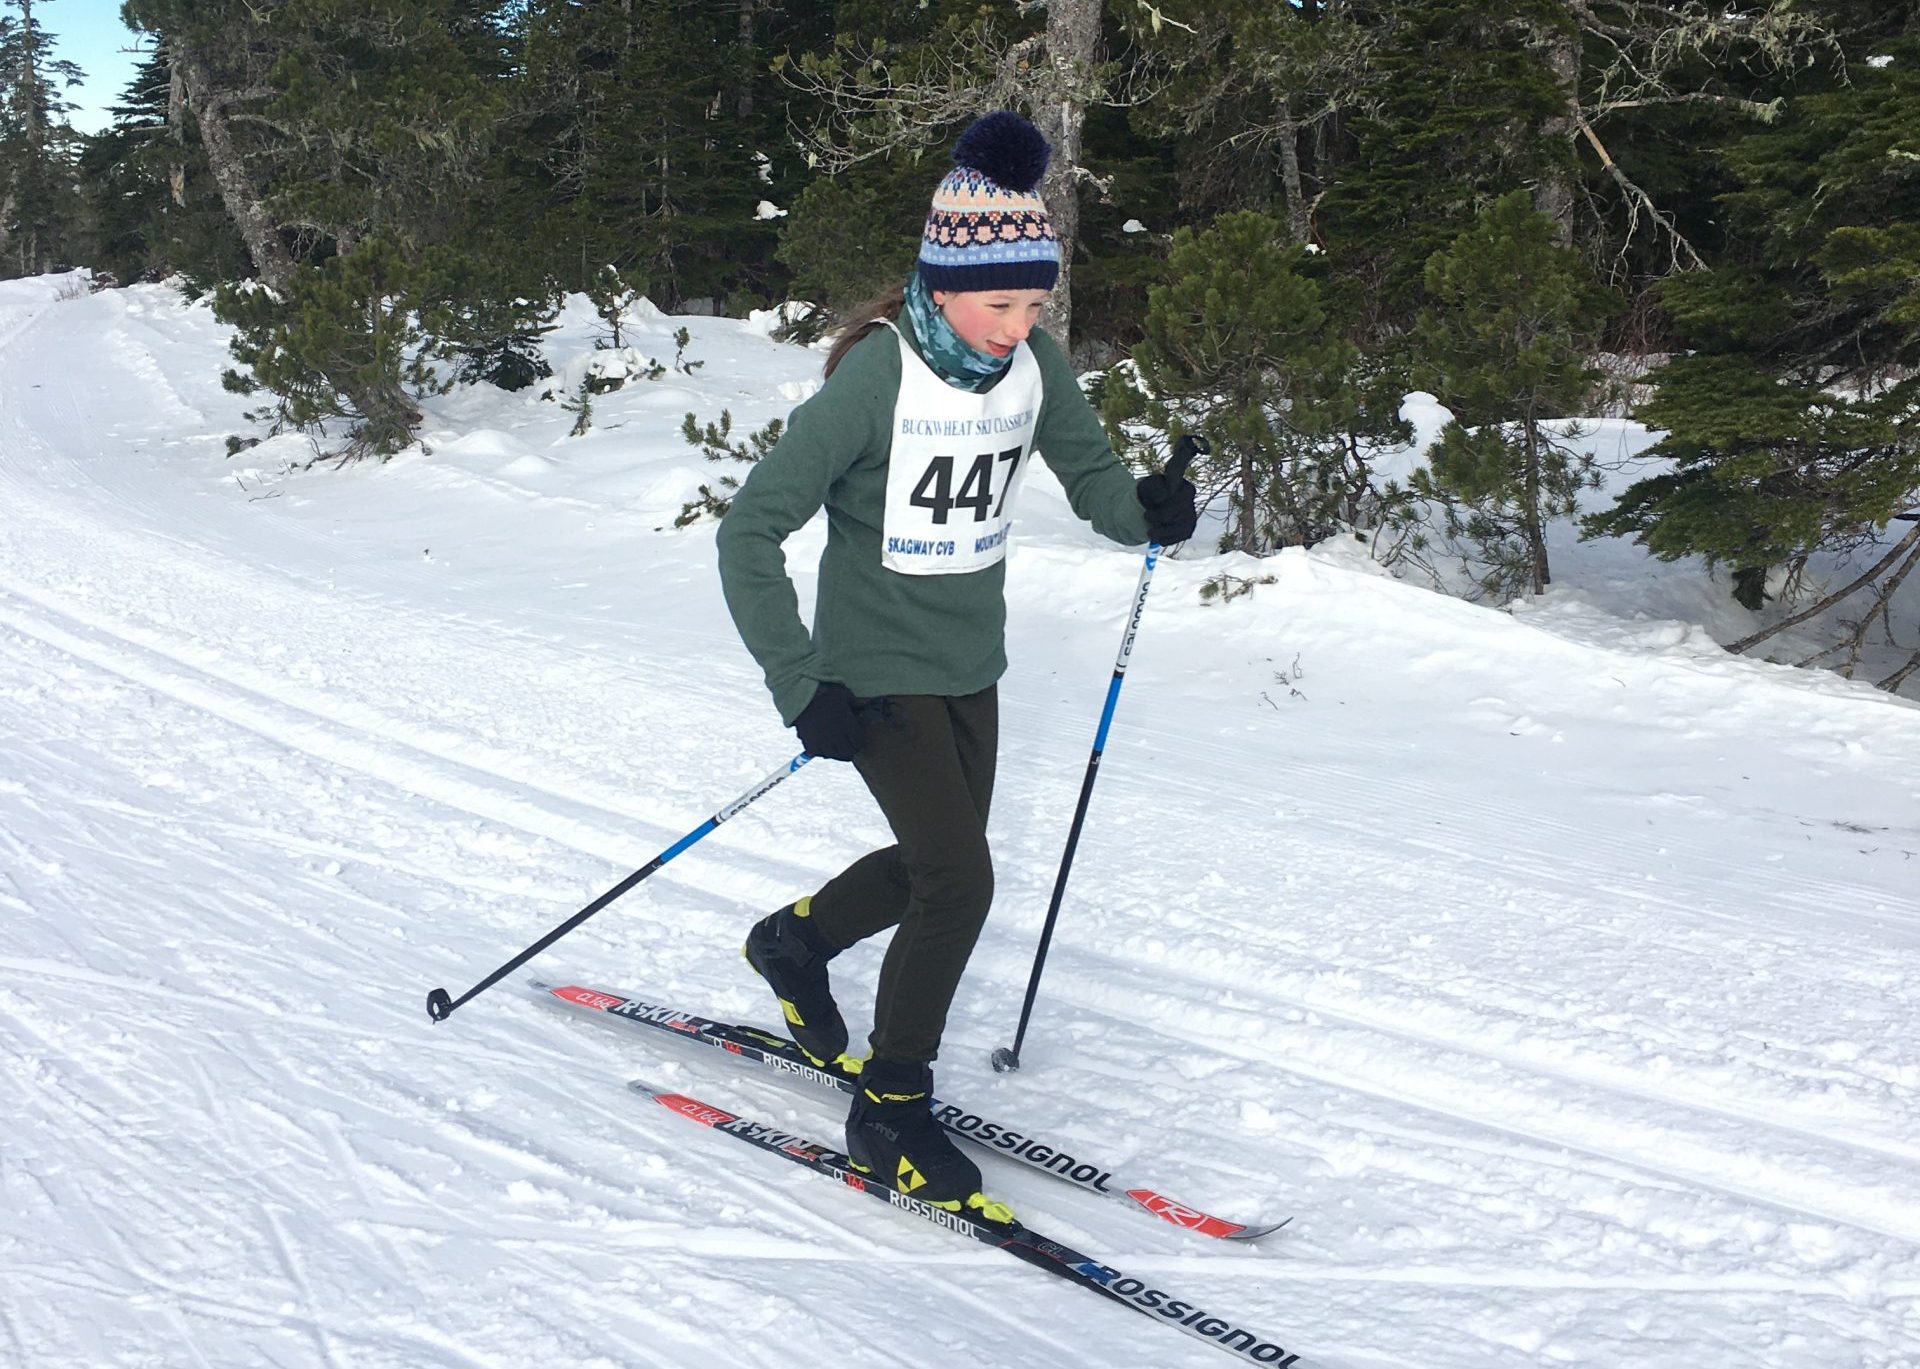 young female skier classic skiing mid-stride